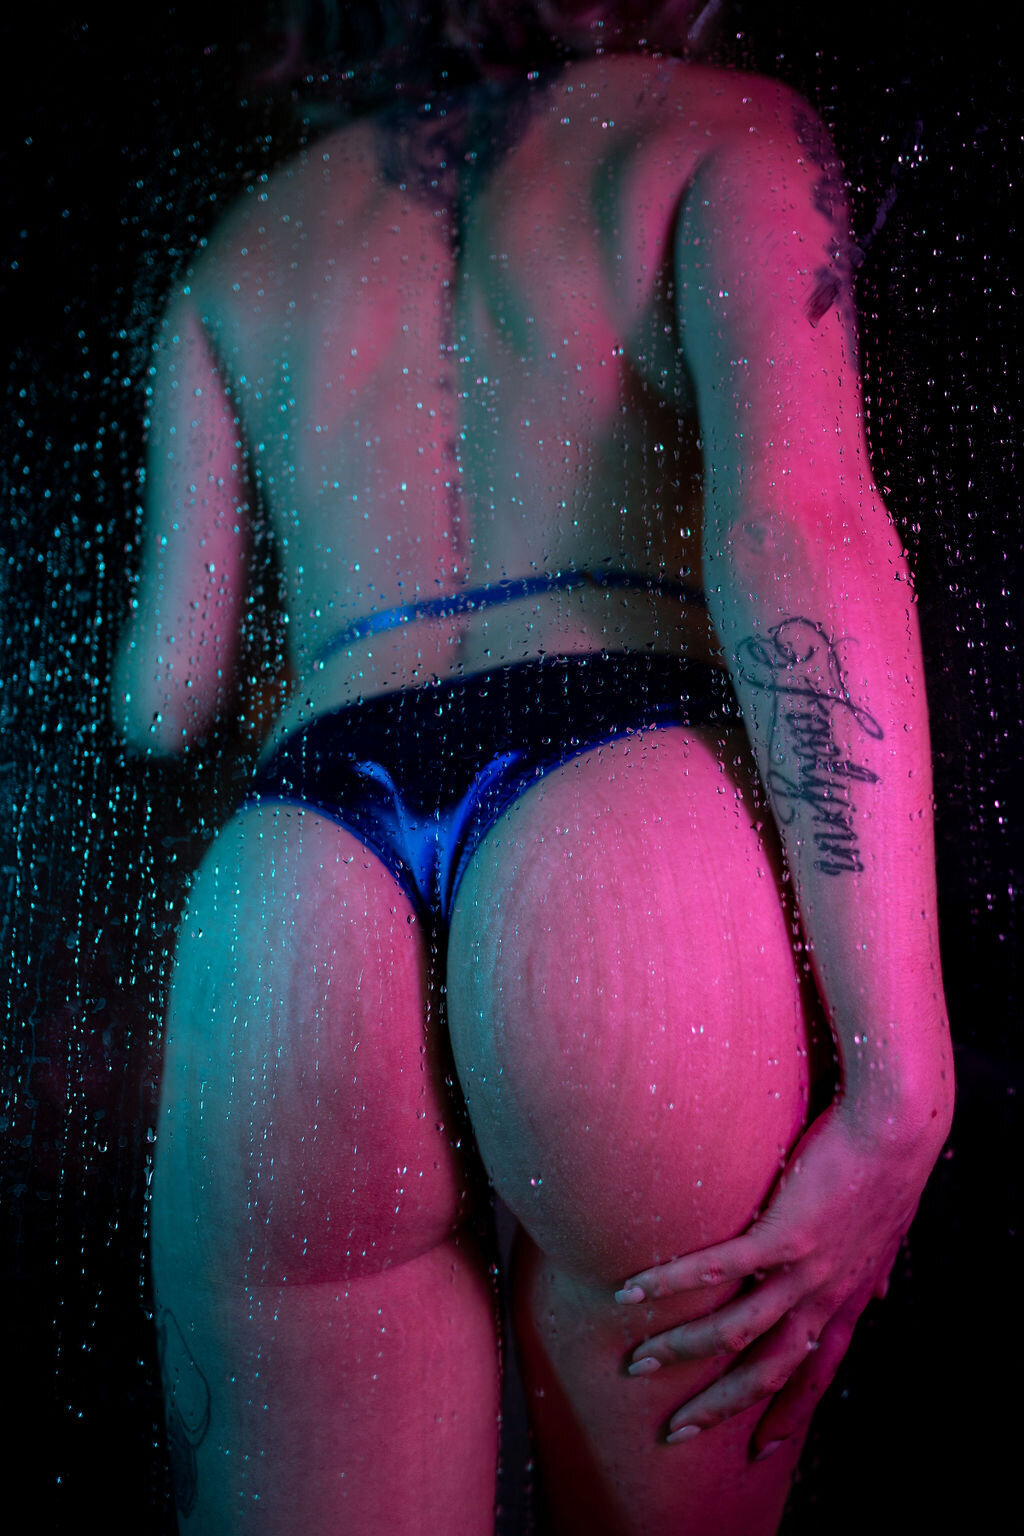 boudoir image of woman in shower with butt showing and blue lingerie